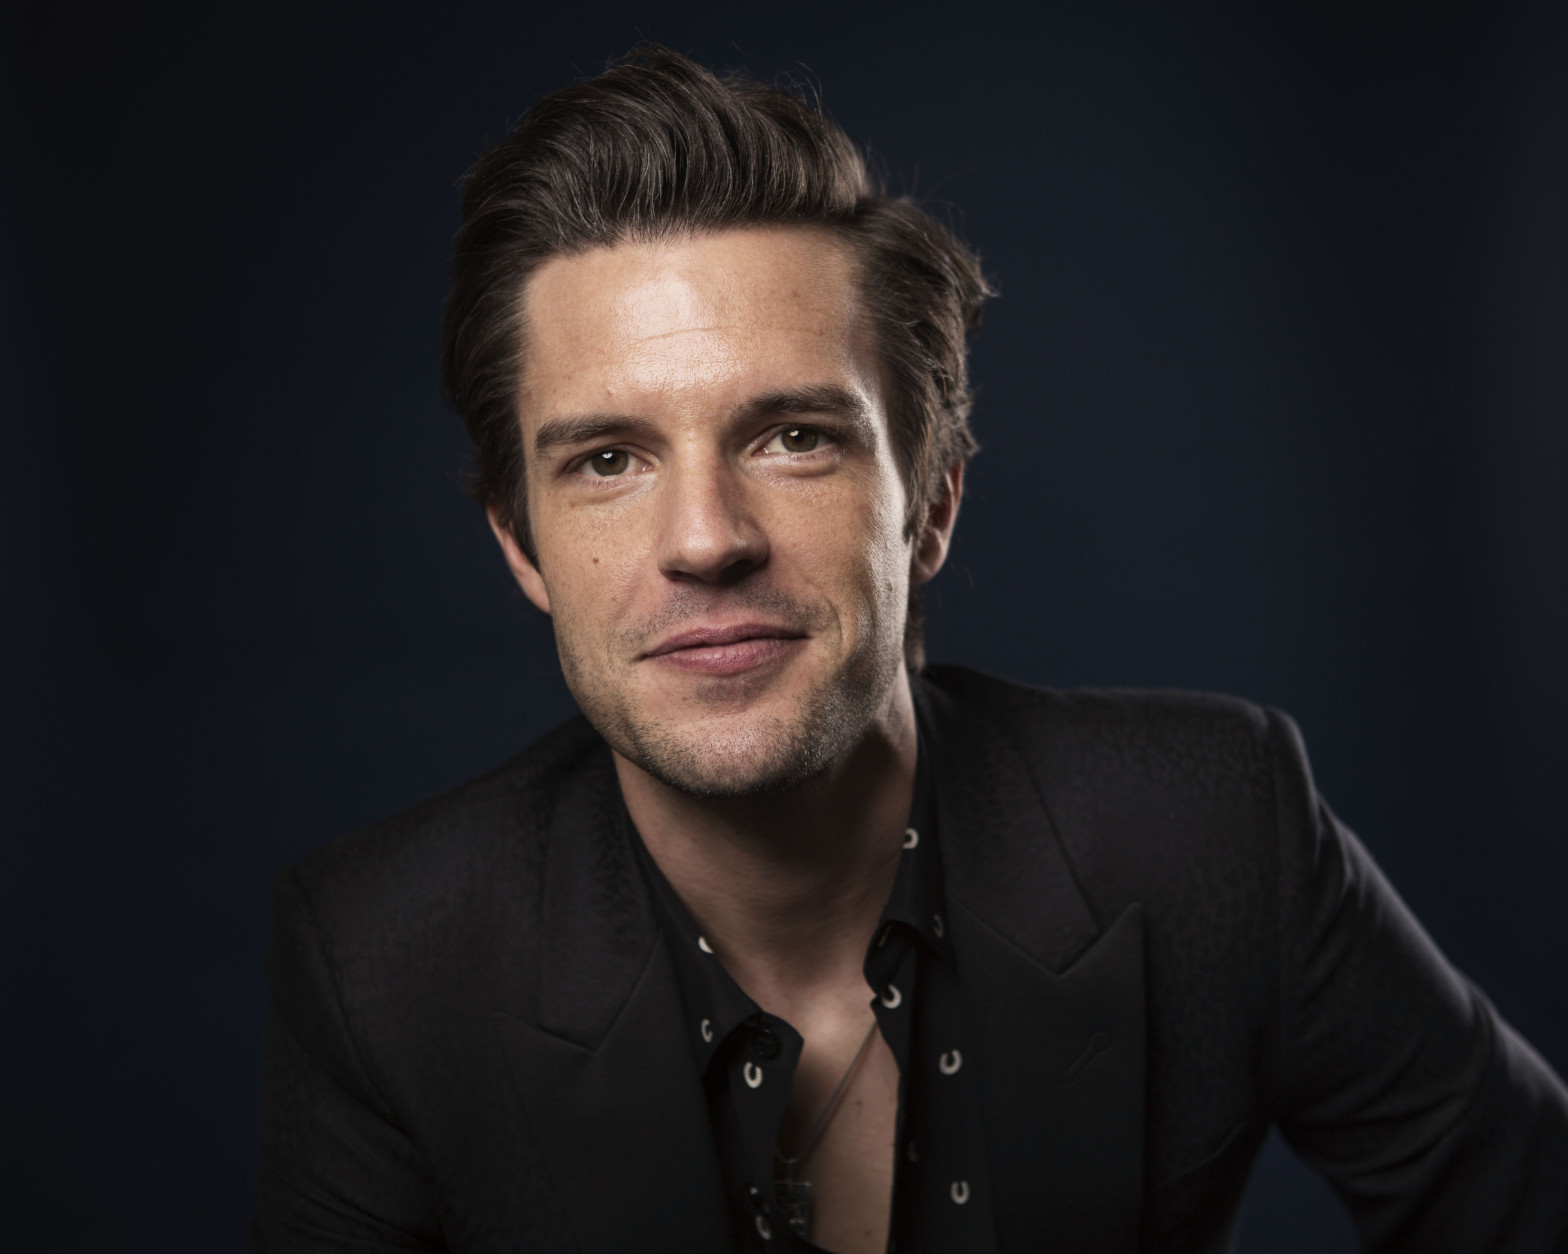 In this March 24, 2015 photo, musician Brandon Flowers poses for a portrait in New York. Flowers, the frontman of the rock band The Killers, is releasing a solo album, "The Desired Effect."  (Photo by Taylor Jewell/Invision/AP)